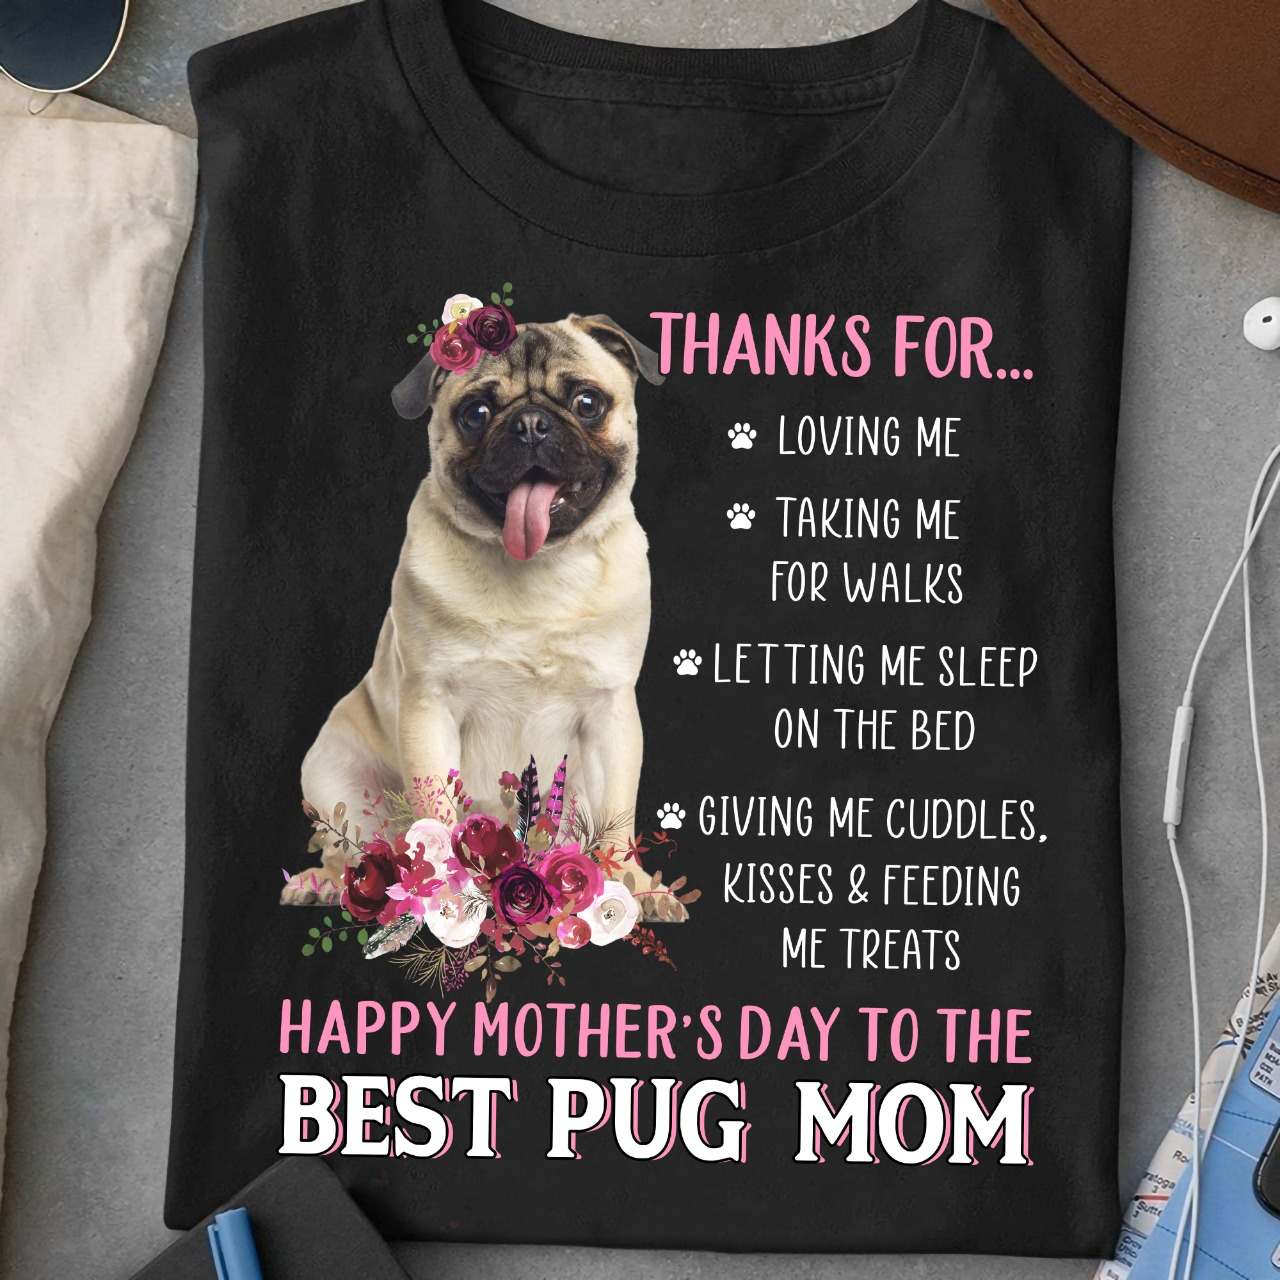 Pug Mom - Thanks for loving me taking me for walks happy mother's day to the best pug mom